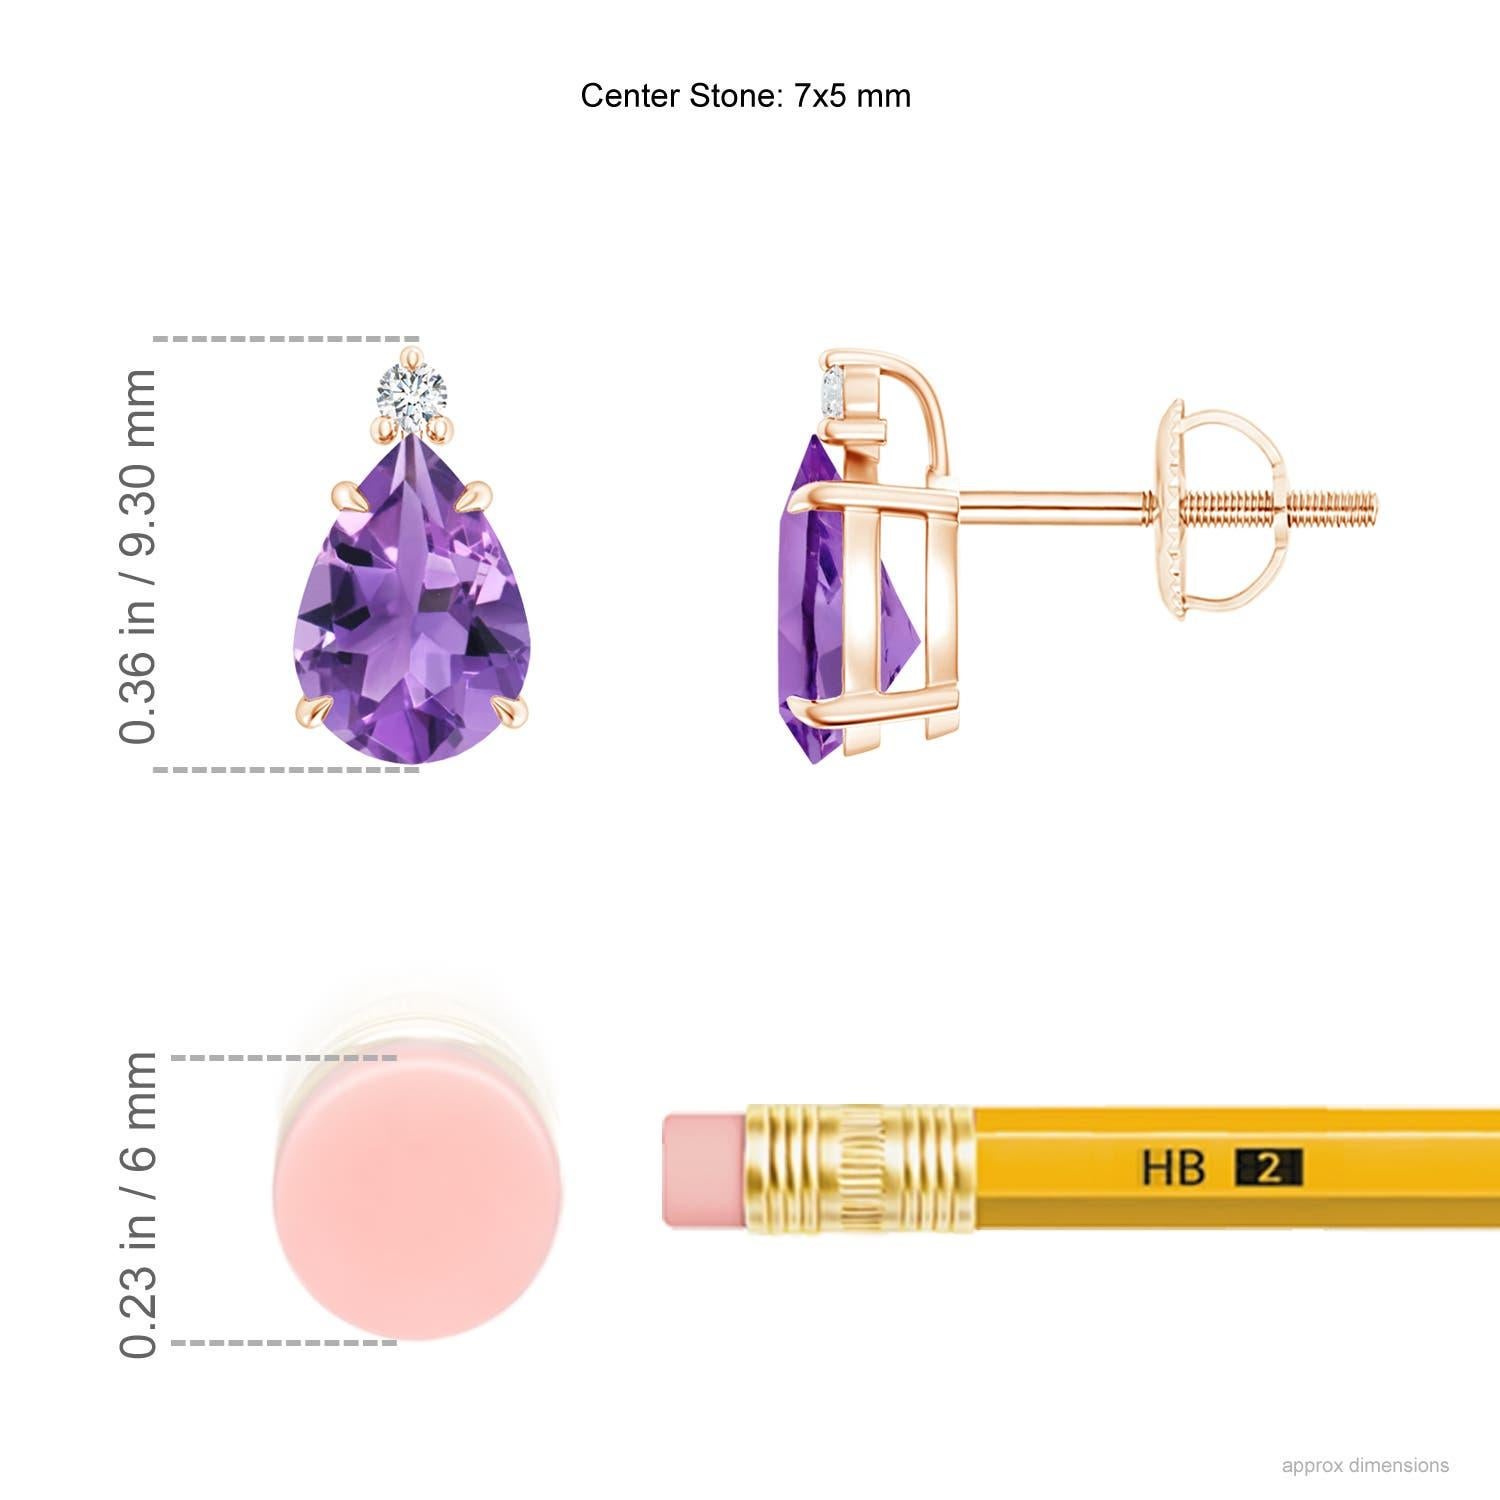 Inverted pear-shaped amethysts, secured in claw settings, exude a striking deep purple hue. The brilliant round diamond at the tip lends added sparkle to these 14k rose gold solitaire amethyst earrings.